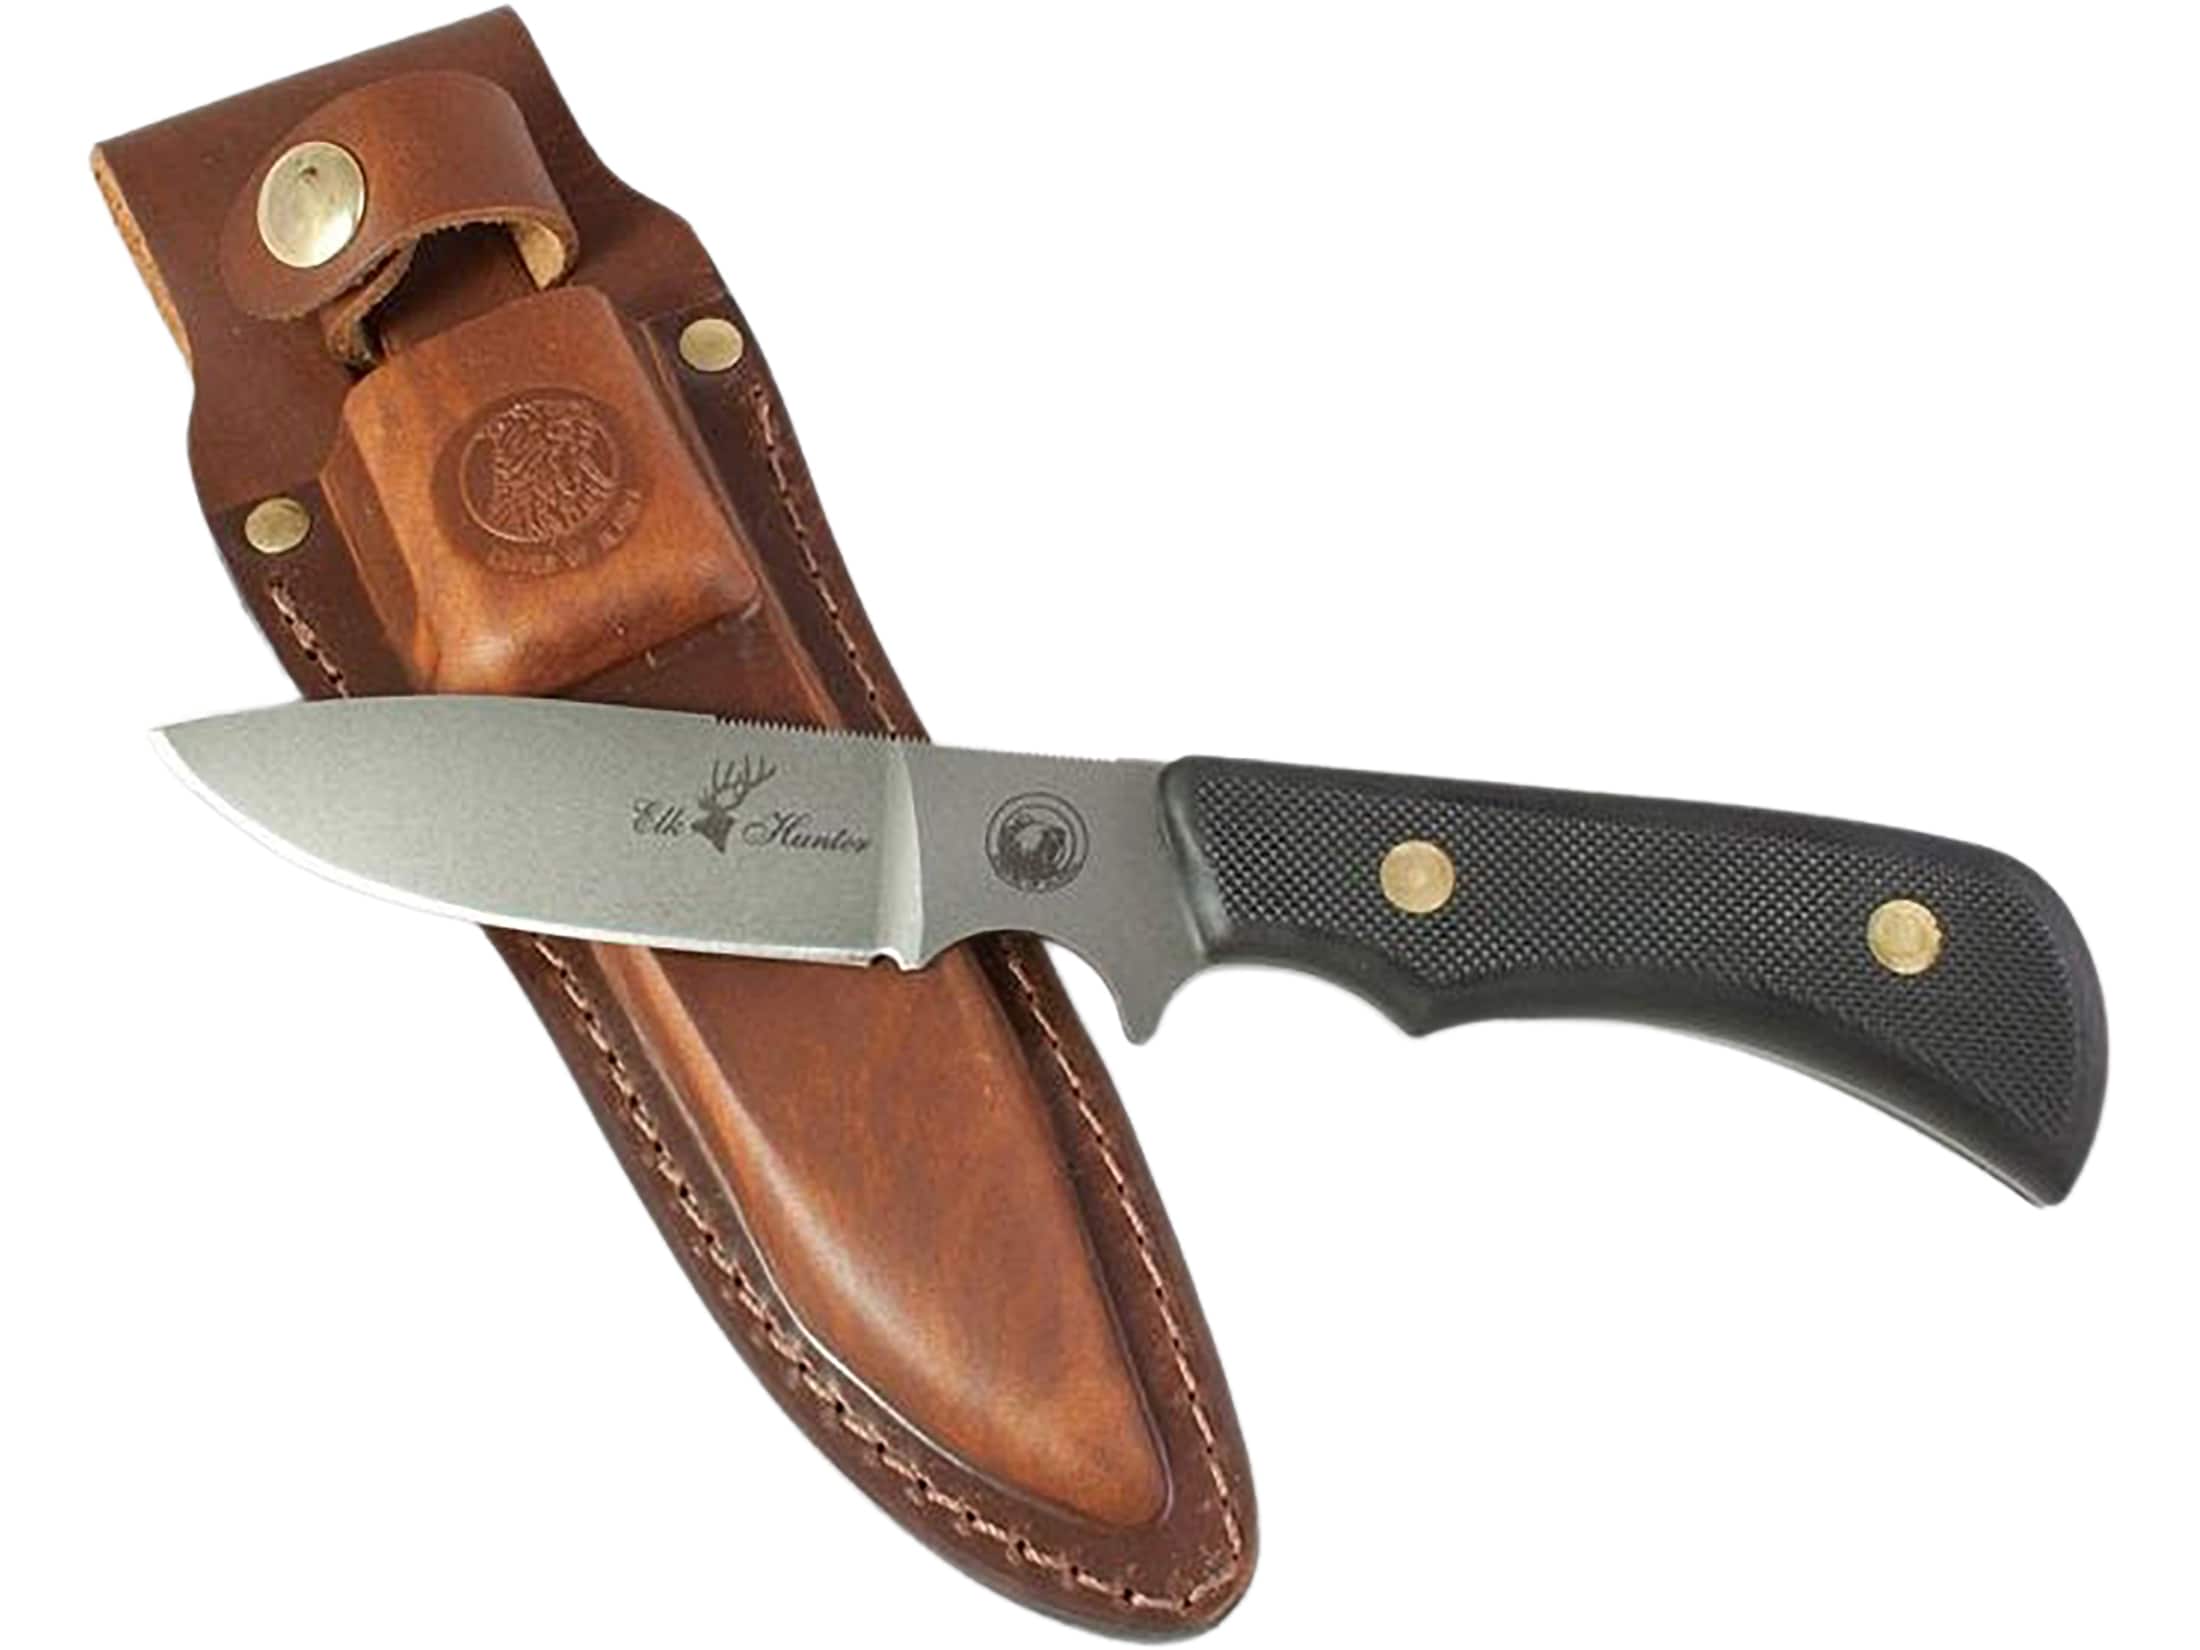 Best overall hunting knife